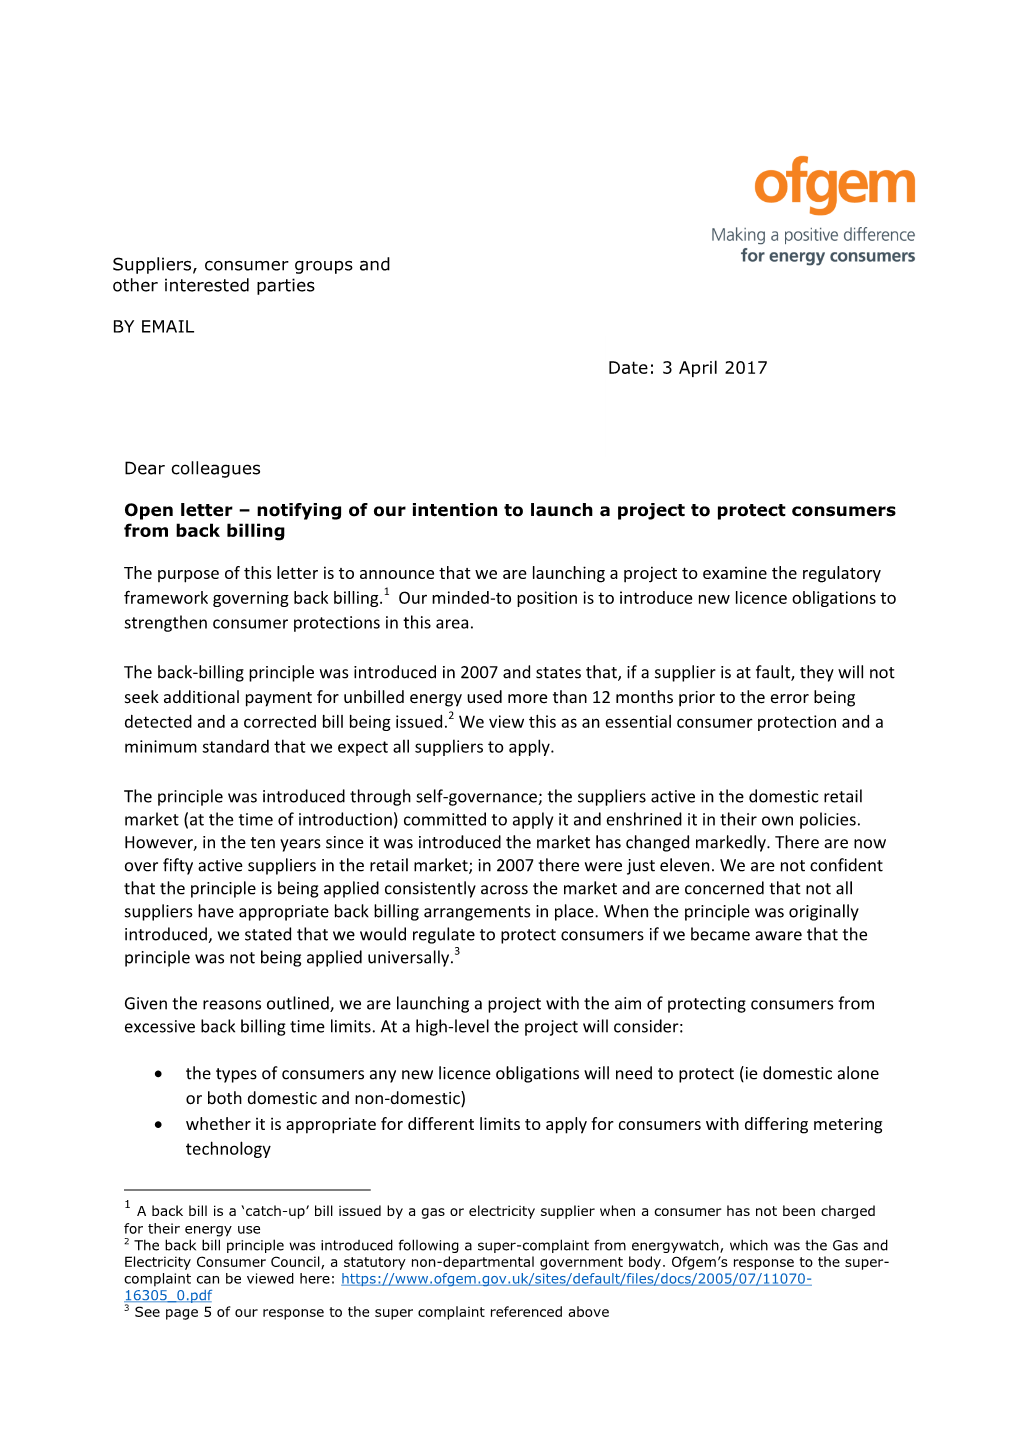 Open Letter – Notifying of Our Intention to Launch a Project to Protect Consumers from Back Billing